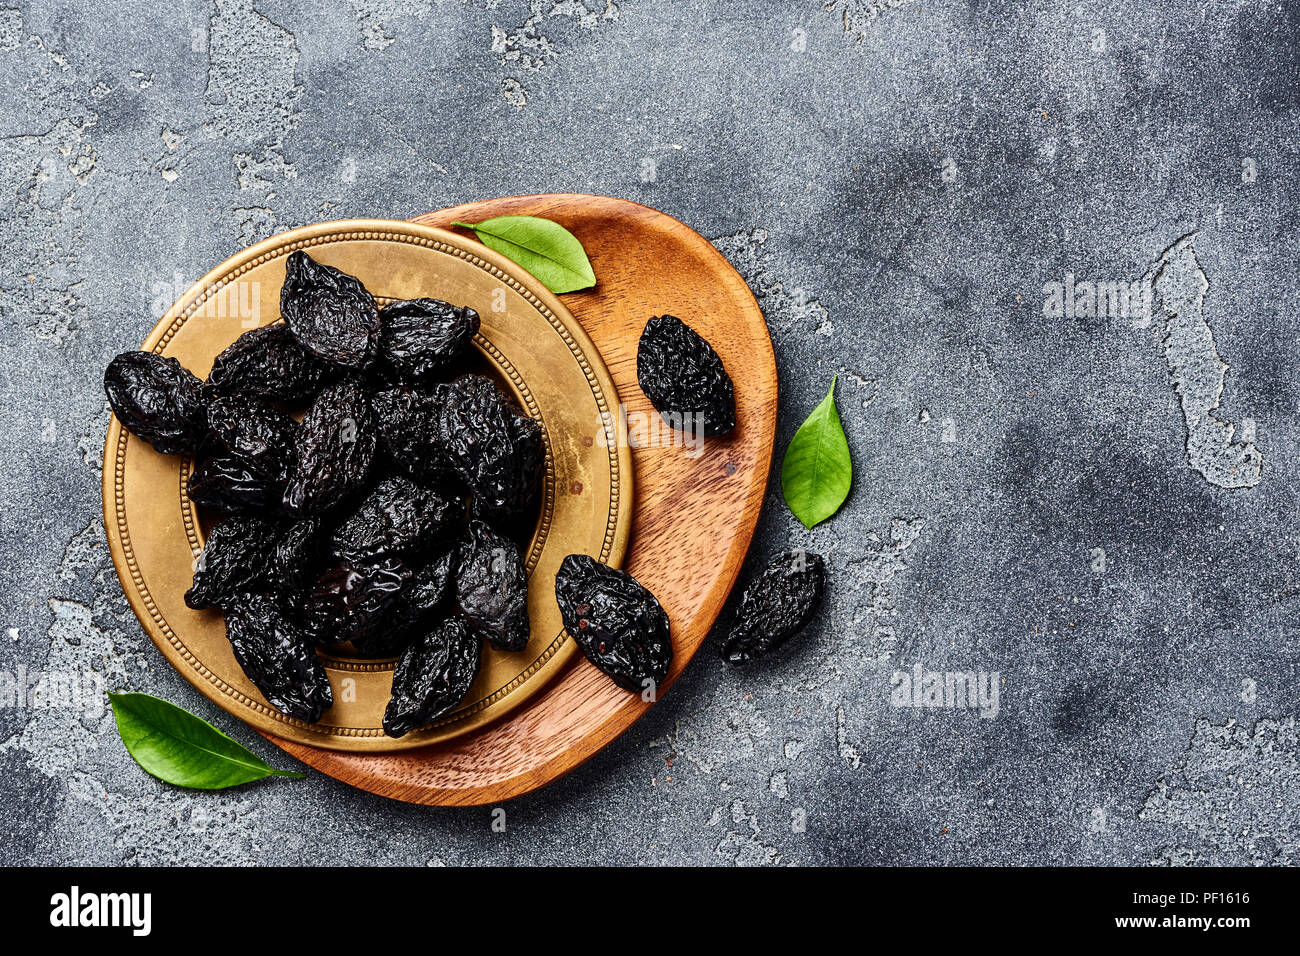 Dried prunes on plate. Top view of peeled plums. Top view. Stock Photo